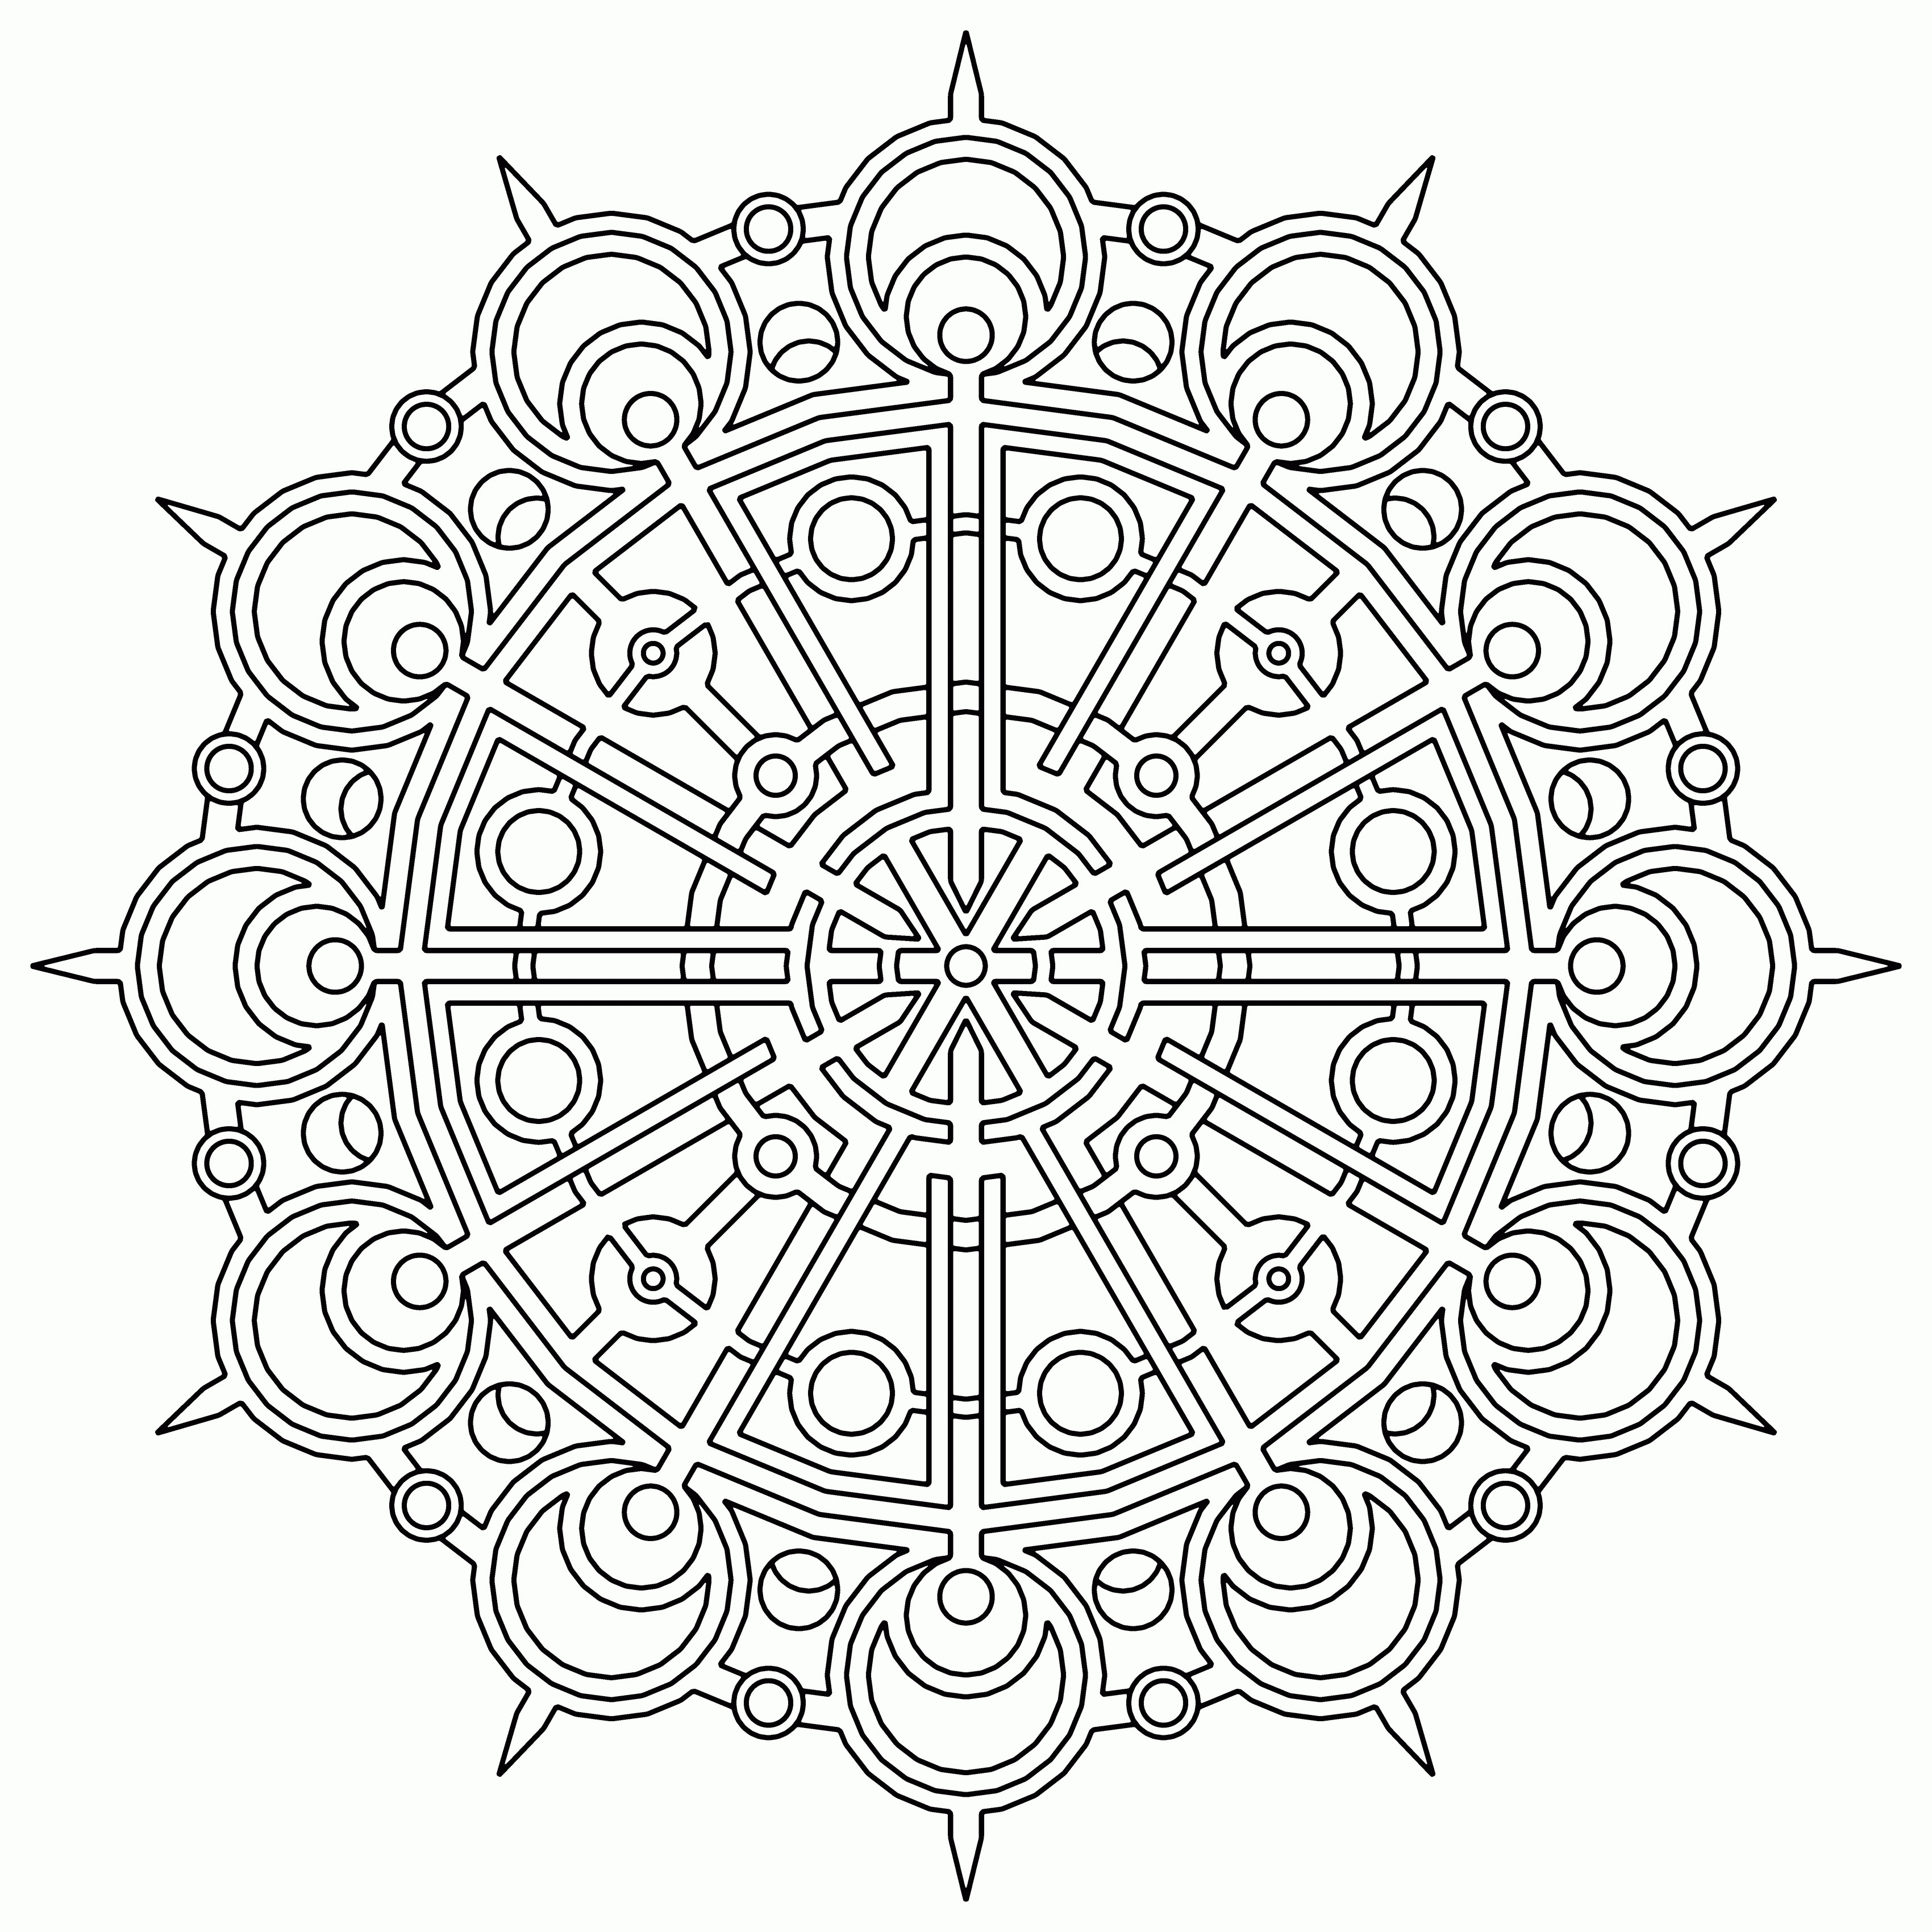 Adult Coloring Book Pages Geometric
 Free Printable Geometric Coloring Pages For Adults